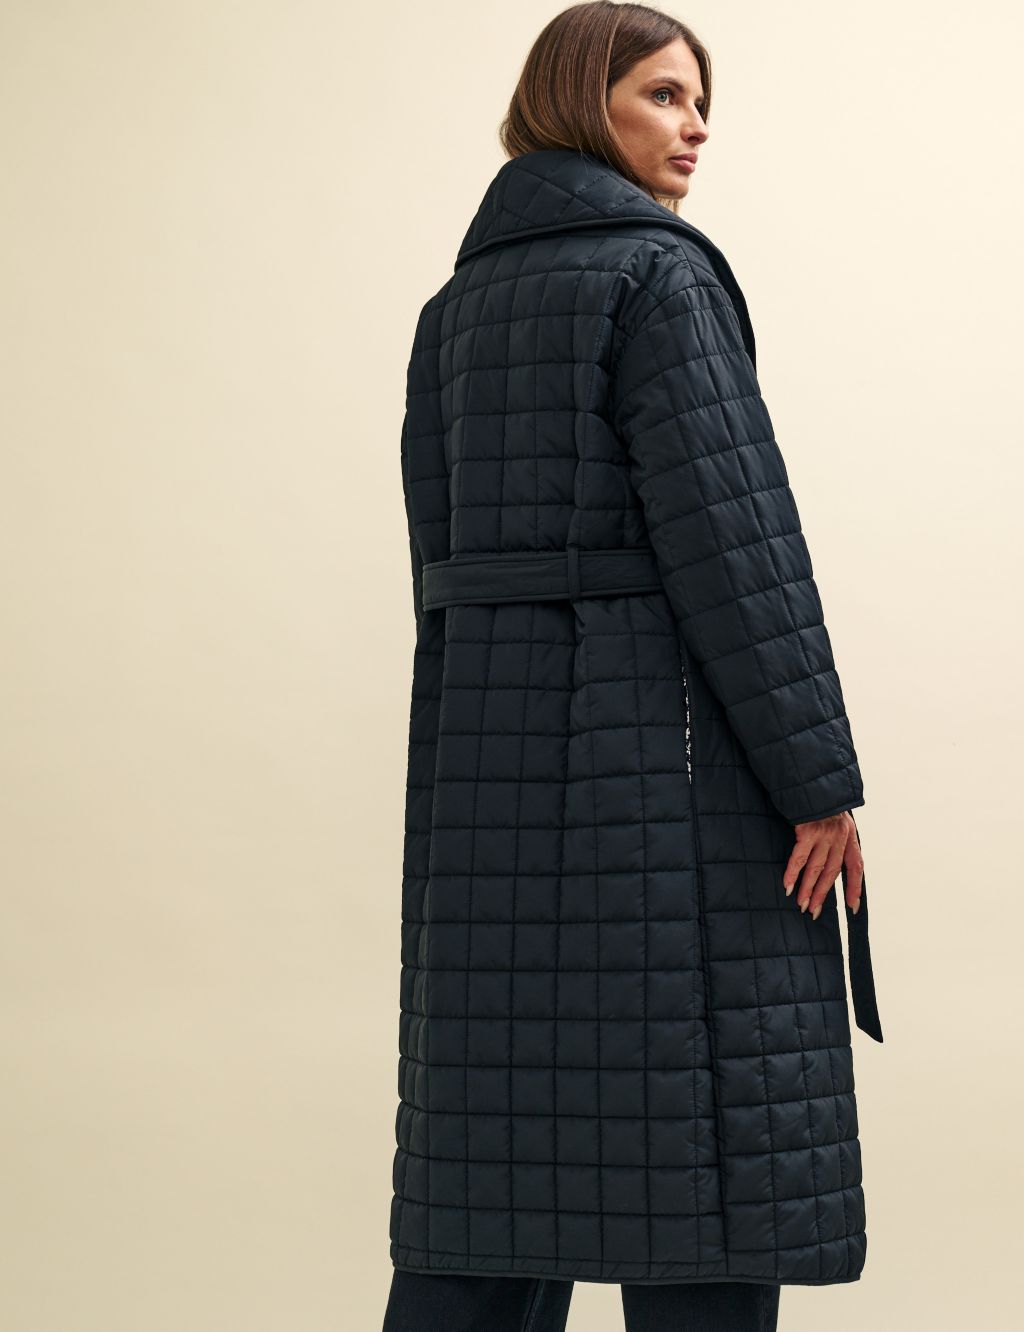 Quilted Belted Shawl Collar Wrap Coat image 3